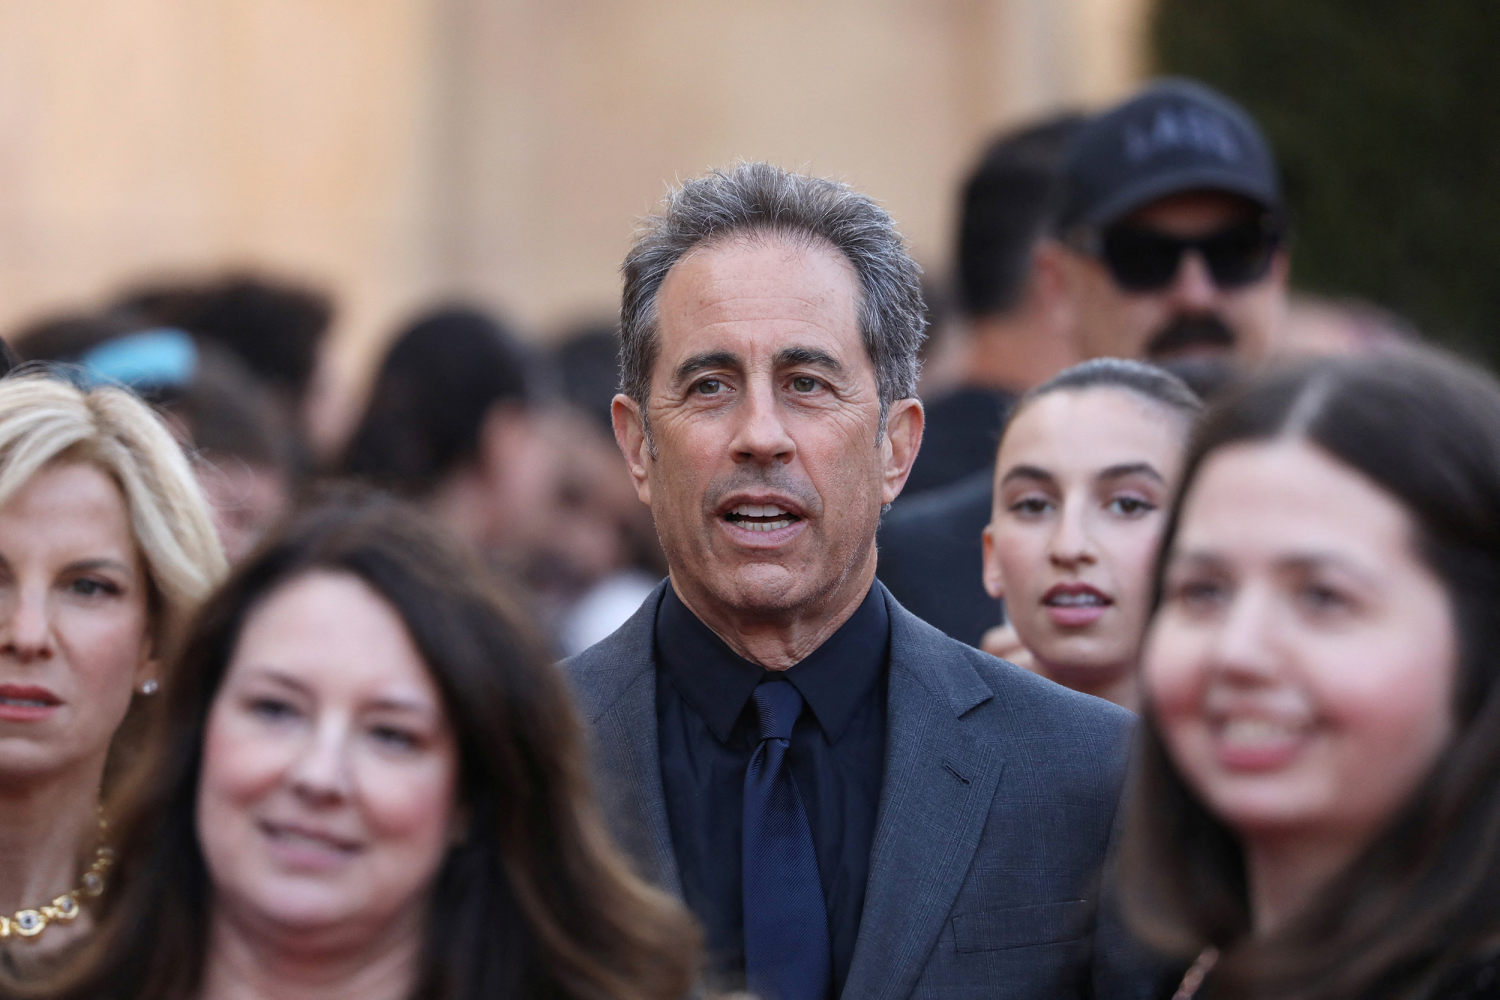 Duke students walk out of Jerry Seinfeld’s commencement speech amid wave of anti-war protests